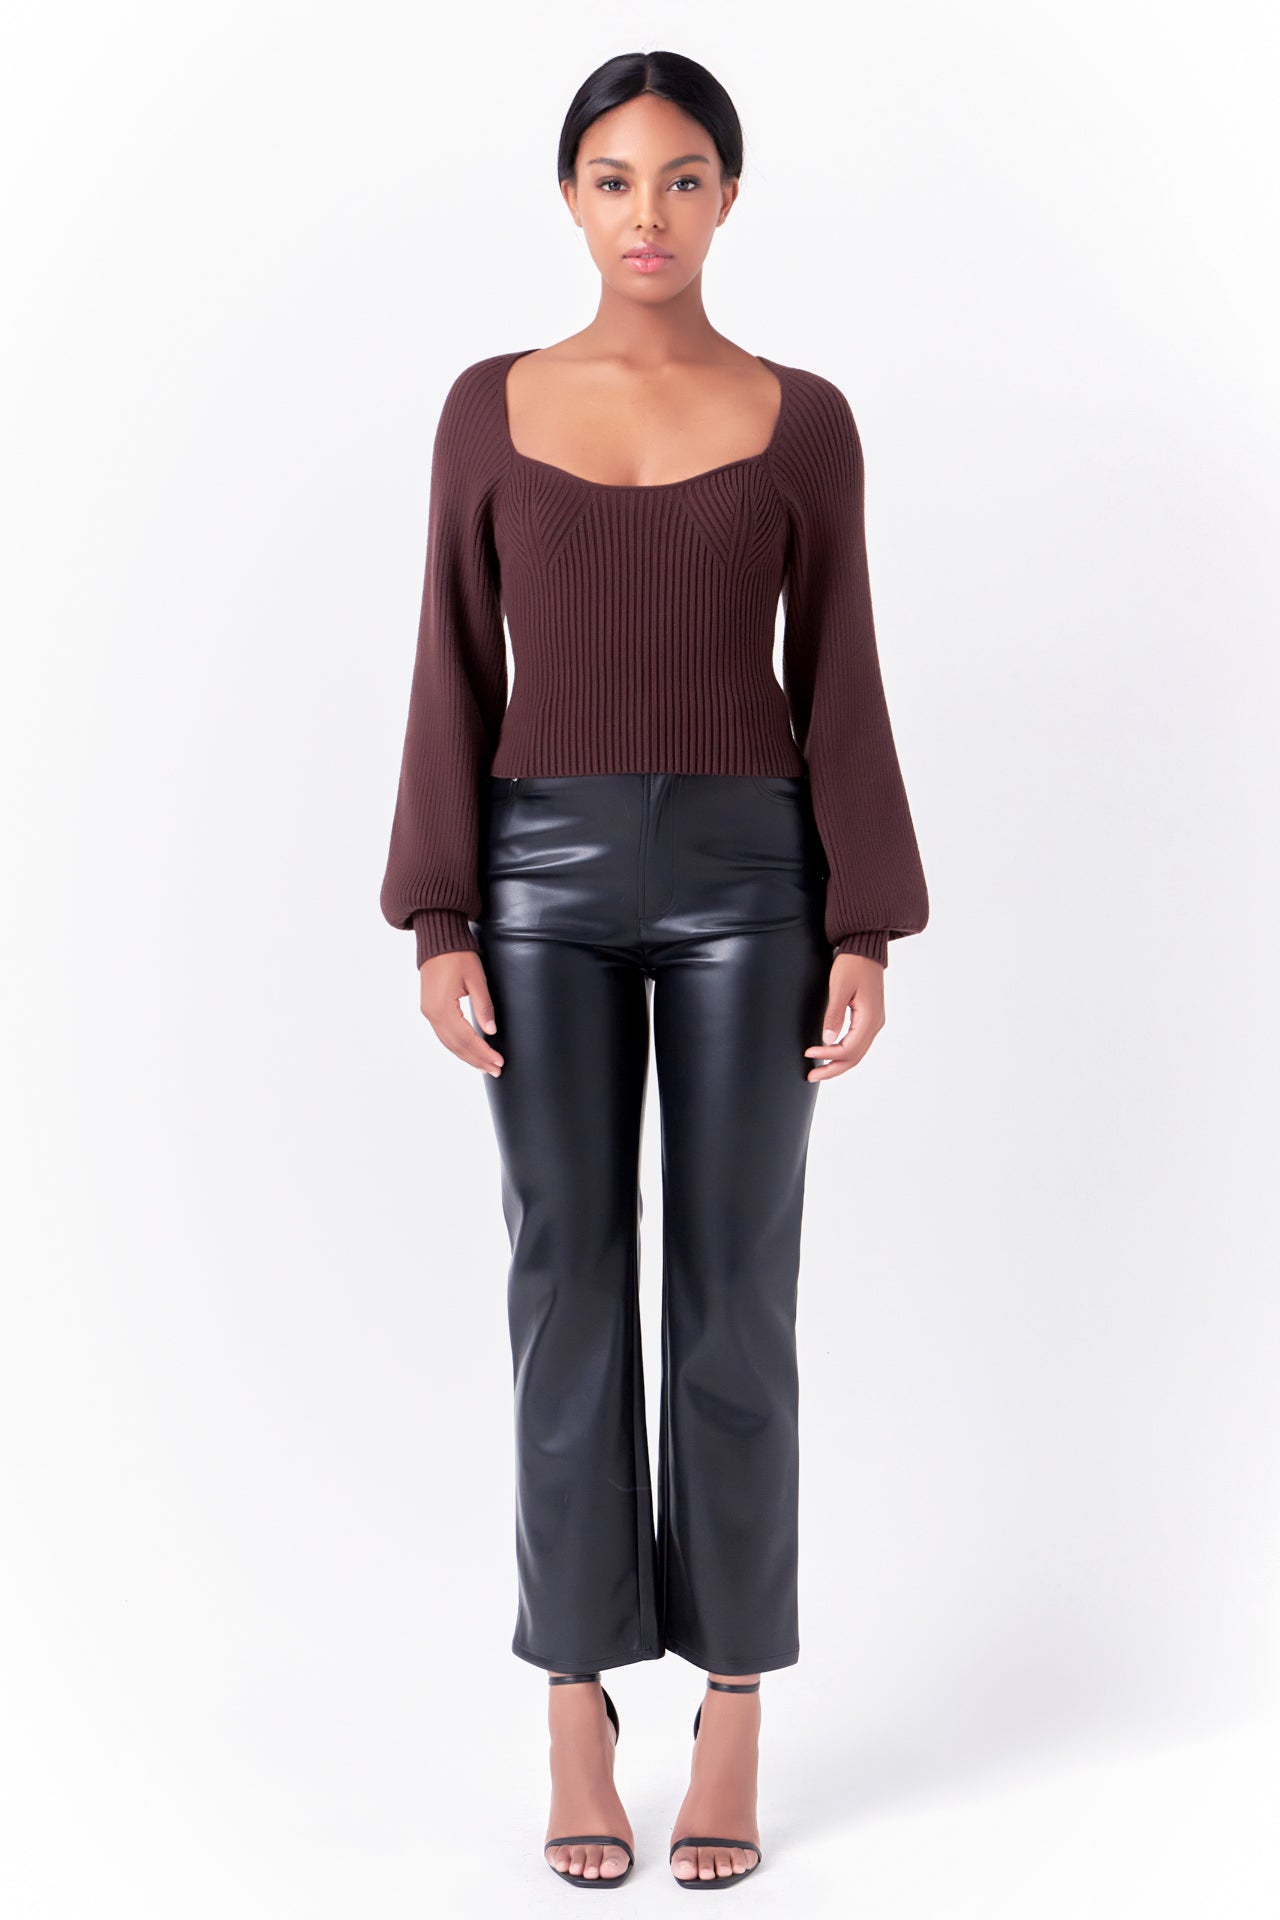 Knitted top in chocolate featuring square neckline, ribbed detailing, balloon sleeves. Front full view.